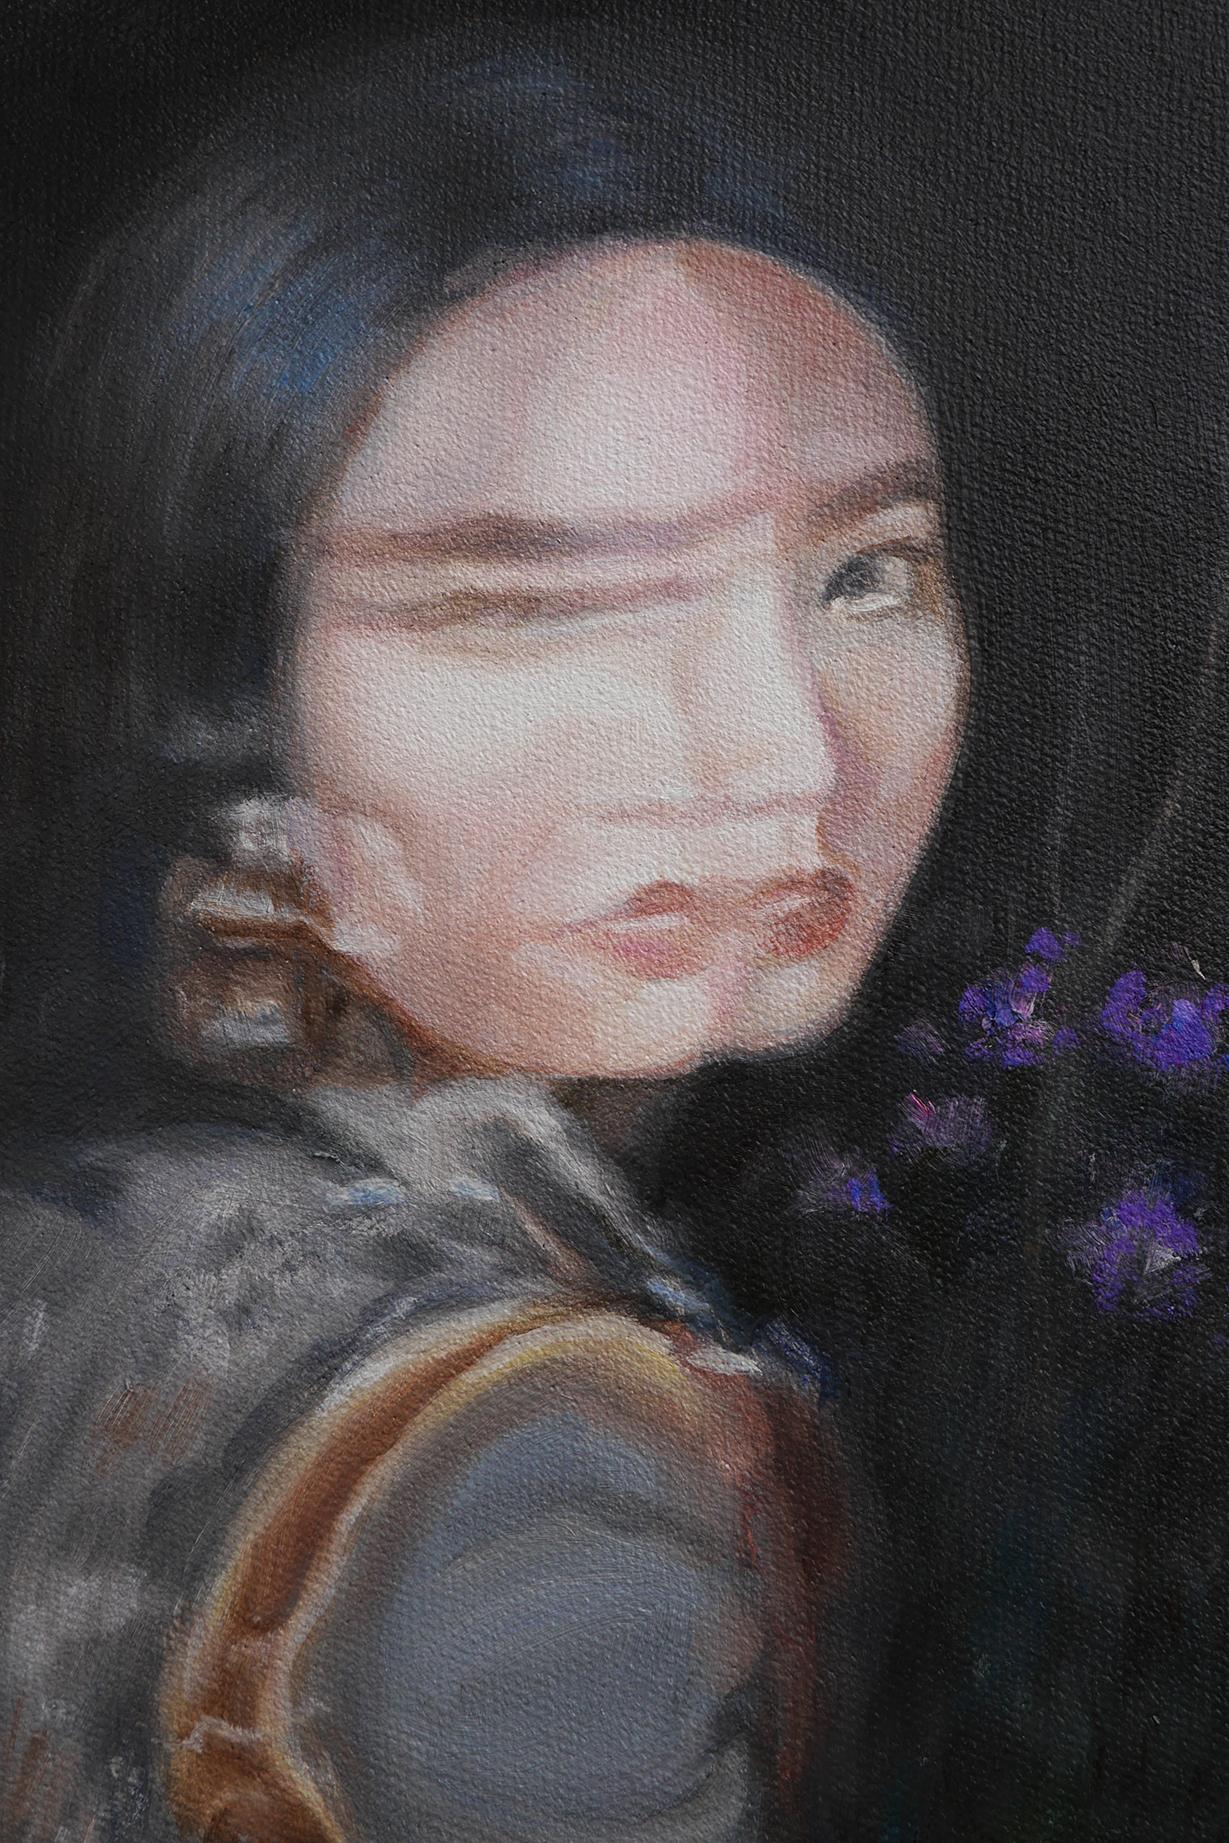 <p>Artist Comments<br />This portrait depicts a woman looking back against a night sky and a sea of wildflowers. Wearing an ambivalent expression, there is an unknown quality to the woman, which evokes a sense of secrecy and romanticism. The air of